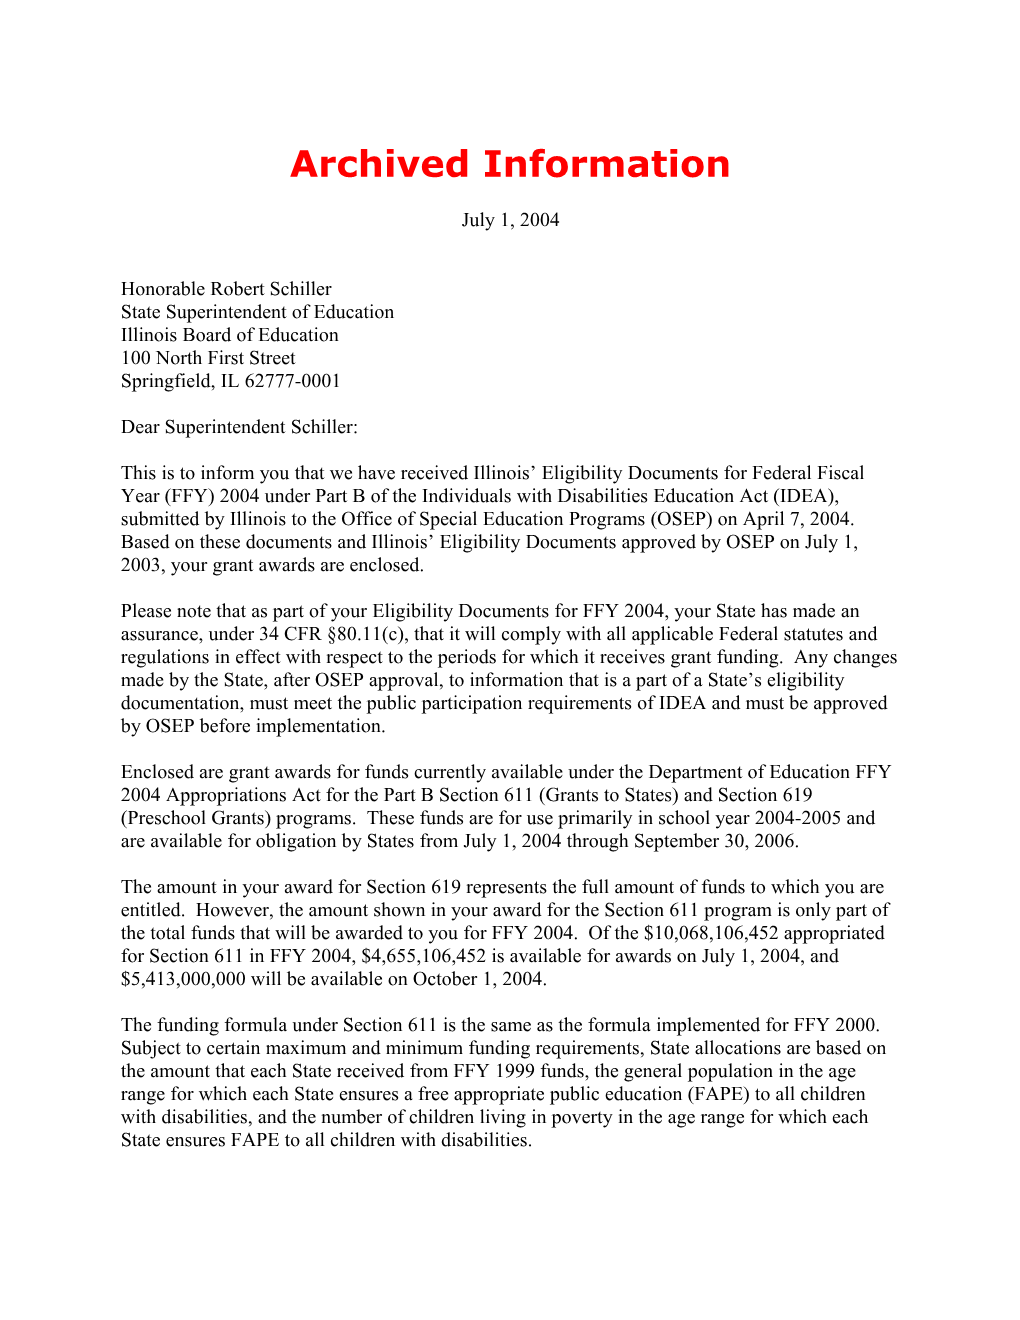 Archived Information: 2004 Illinois Individuals with Disabilities Act (IDEA) Part B Grant